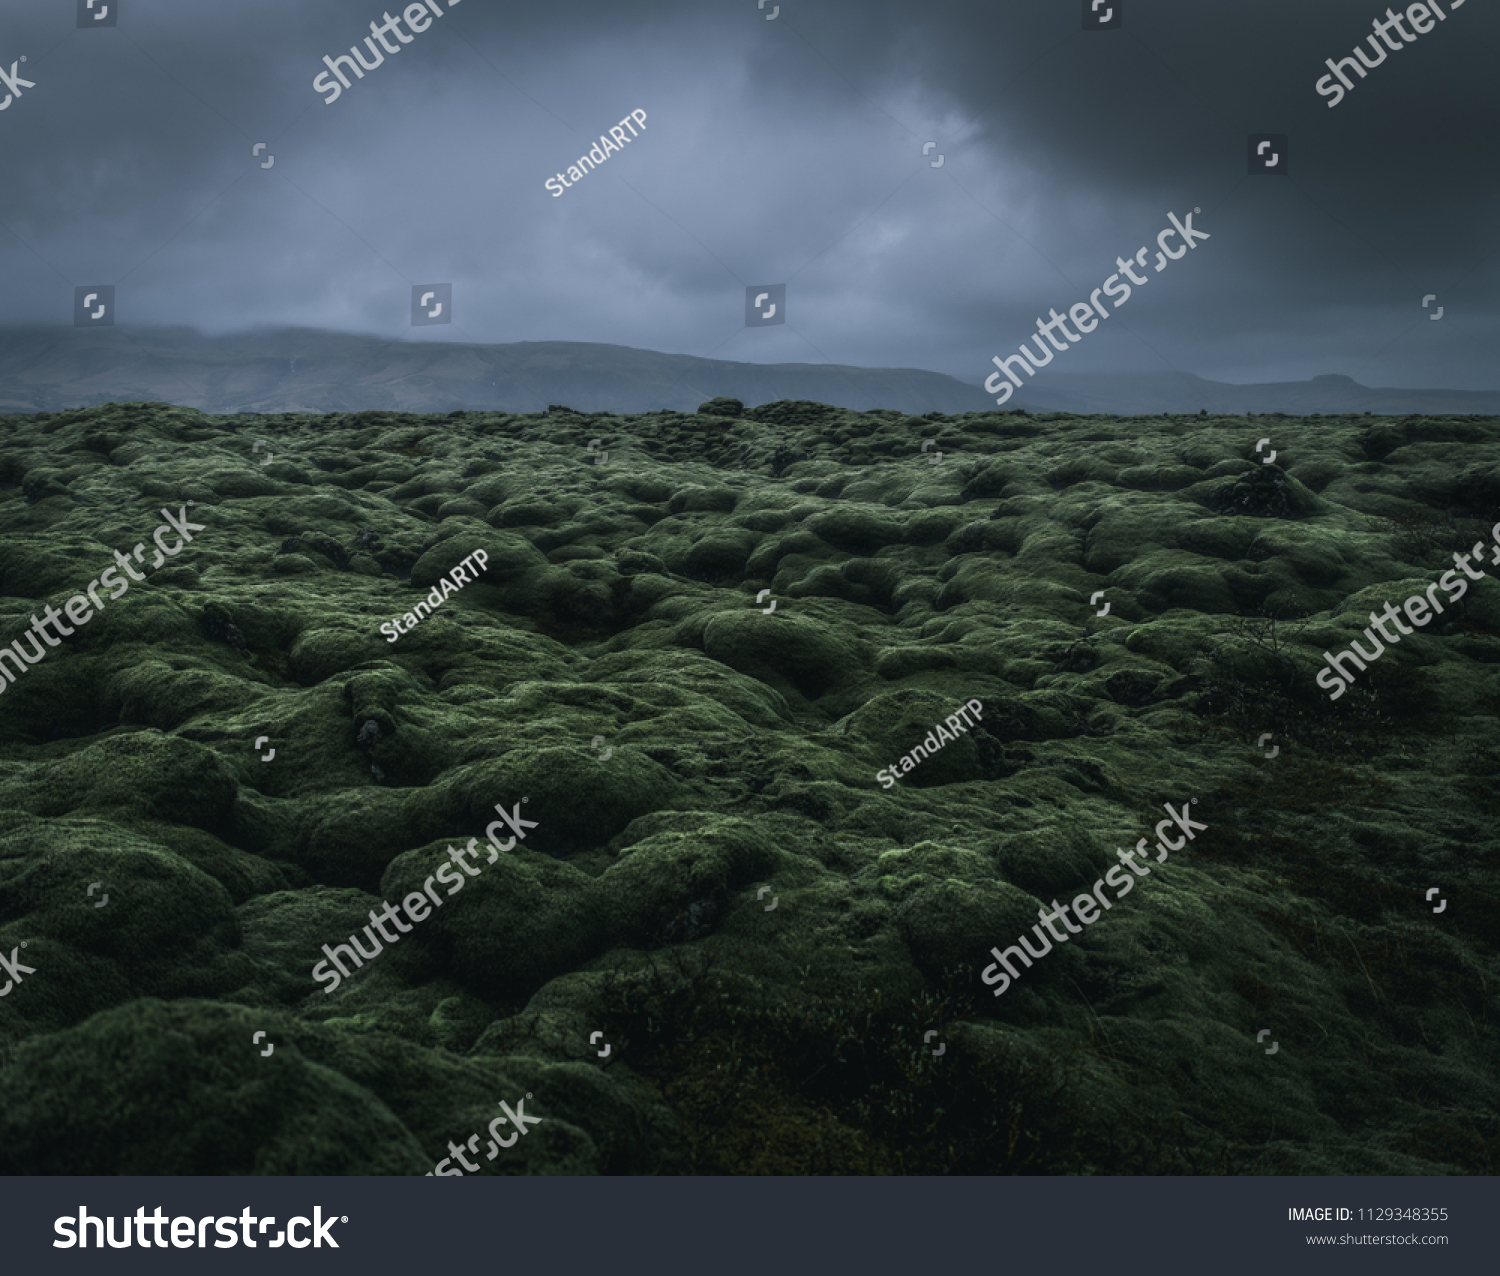 wide wild moss field in Iceland with a dramatic cloudy sky and mountains in the misty background with a moody atmosphere during a rainy day dwith a grey background and green foreground #1129348355